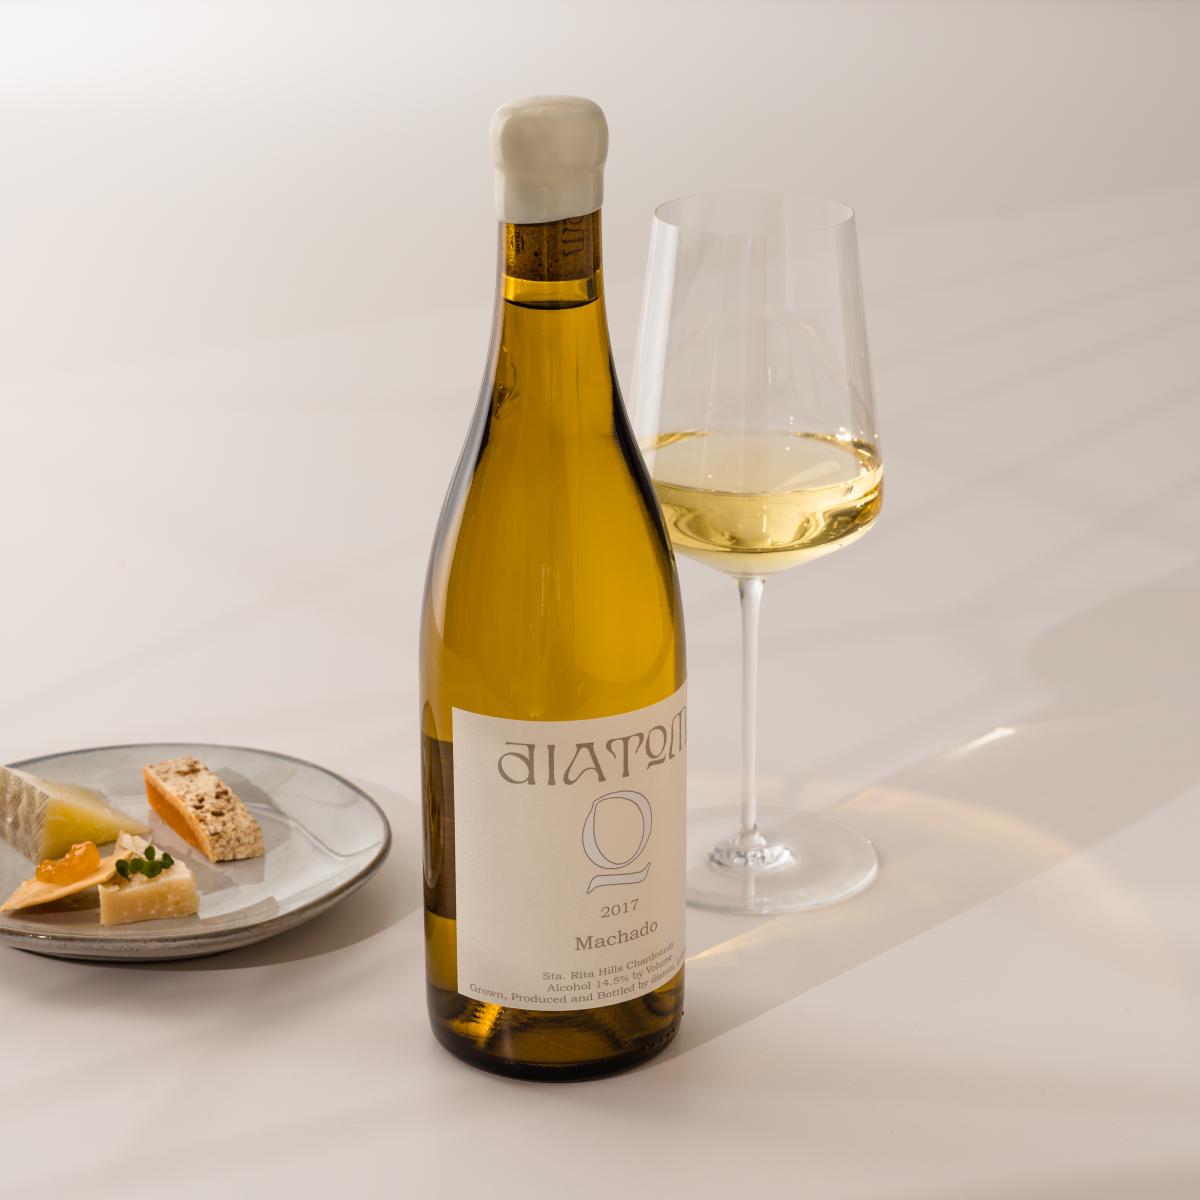 Diatom wine bottle with wine glass and cheese 